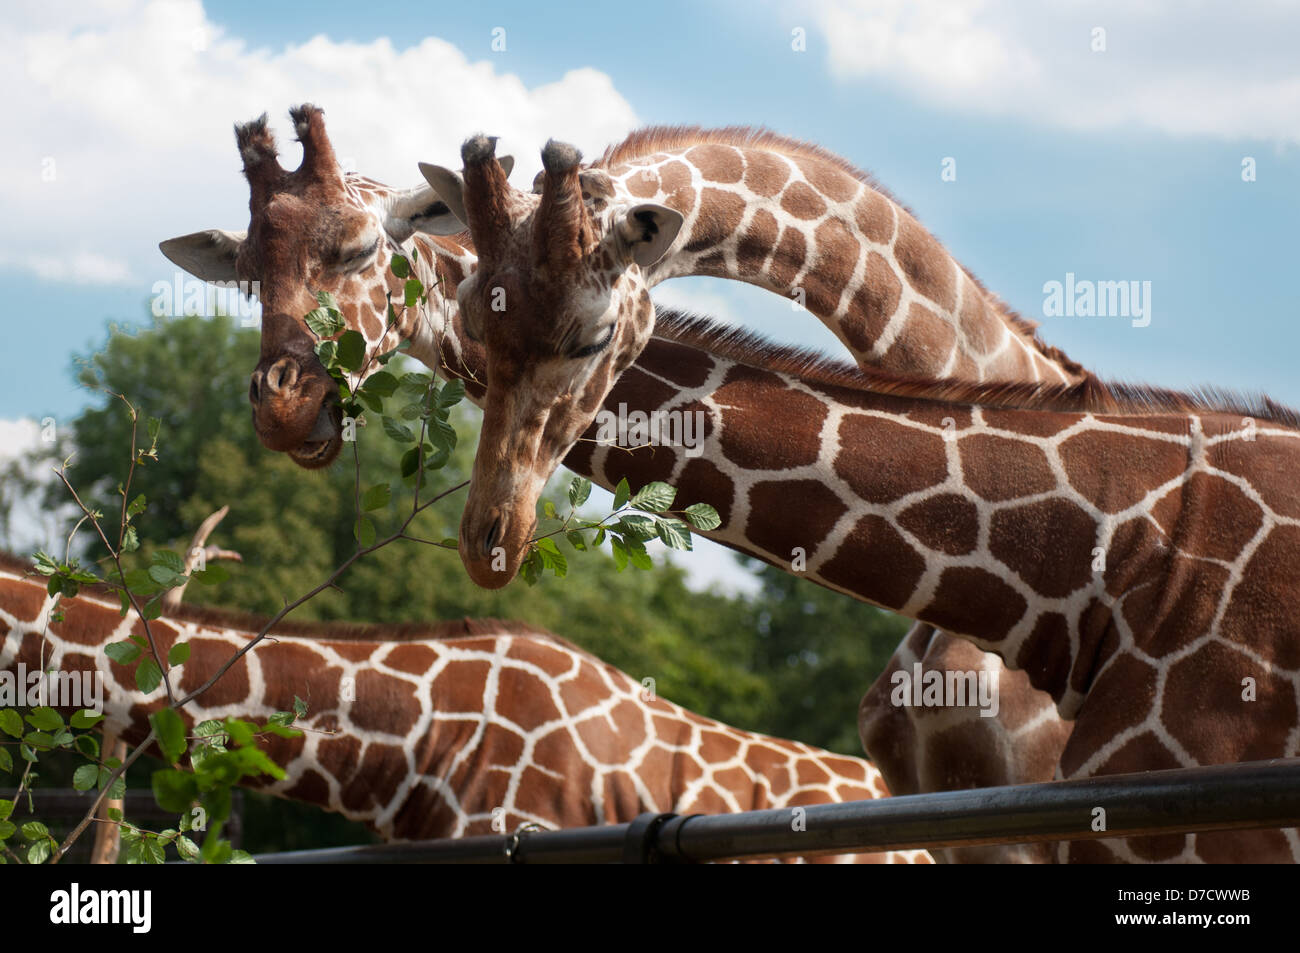 Giraffes at Whipsnade Zoo intertwining their necks to reach branches. Stock Photo